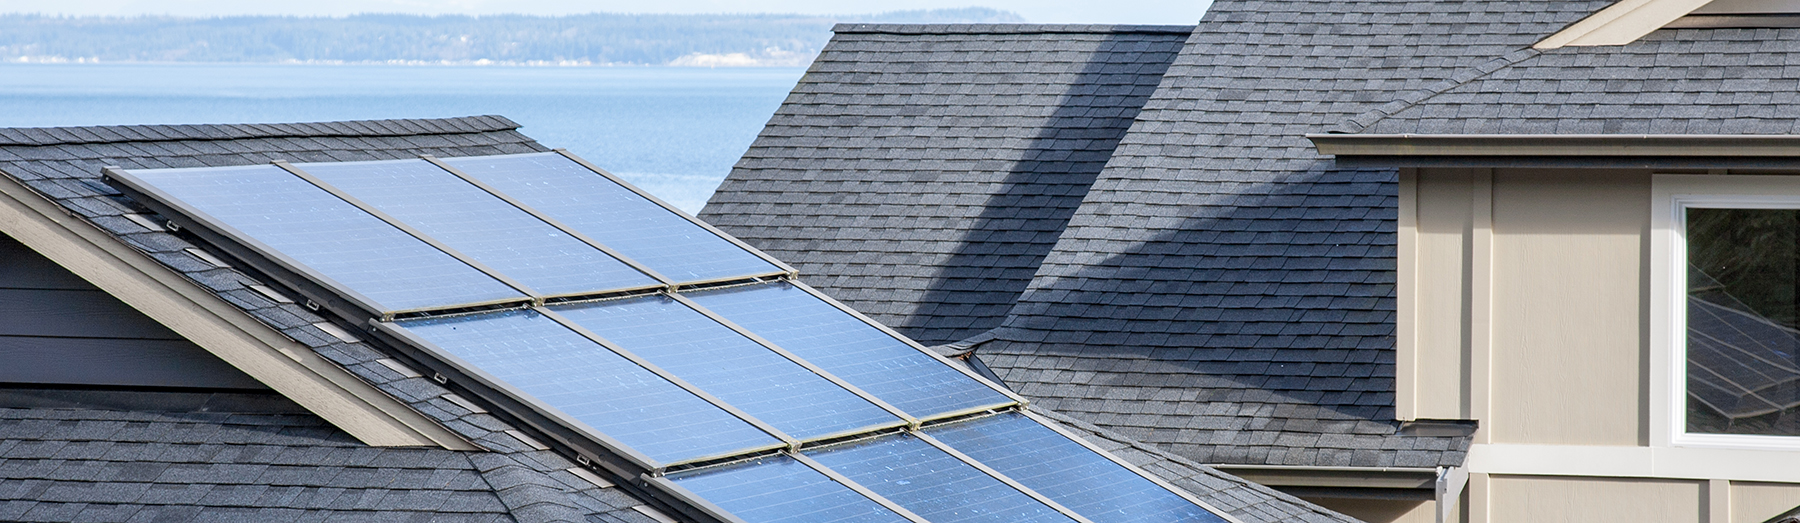 Rooftop Solar Panels Sighted Across the United States